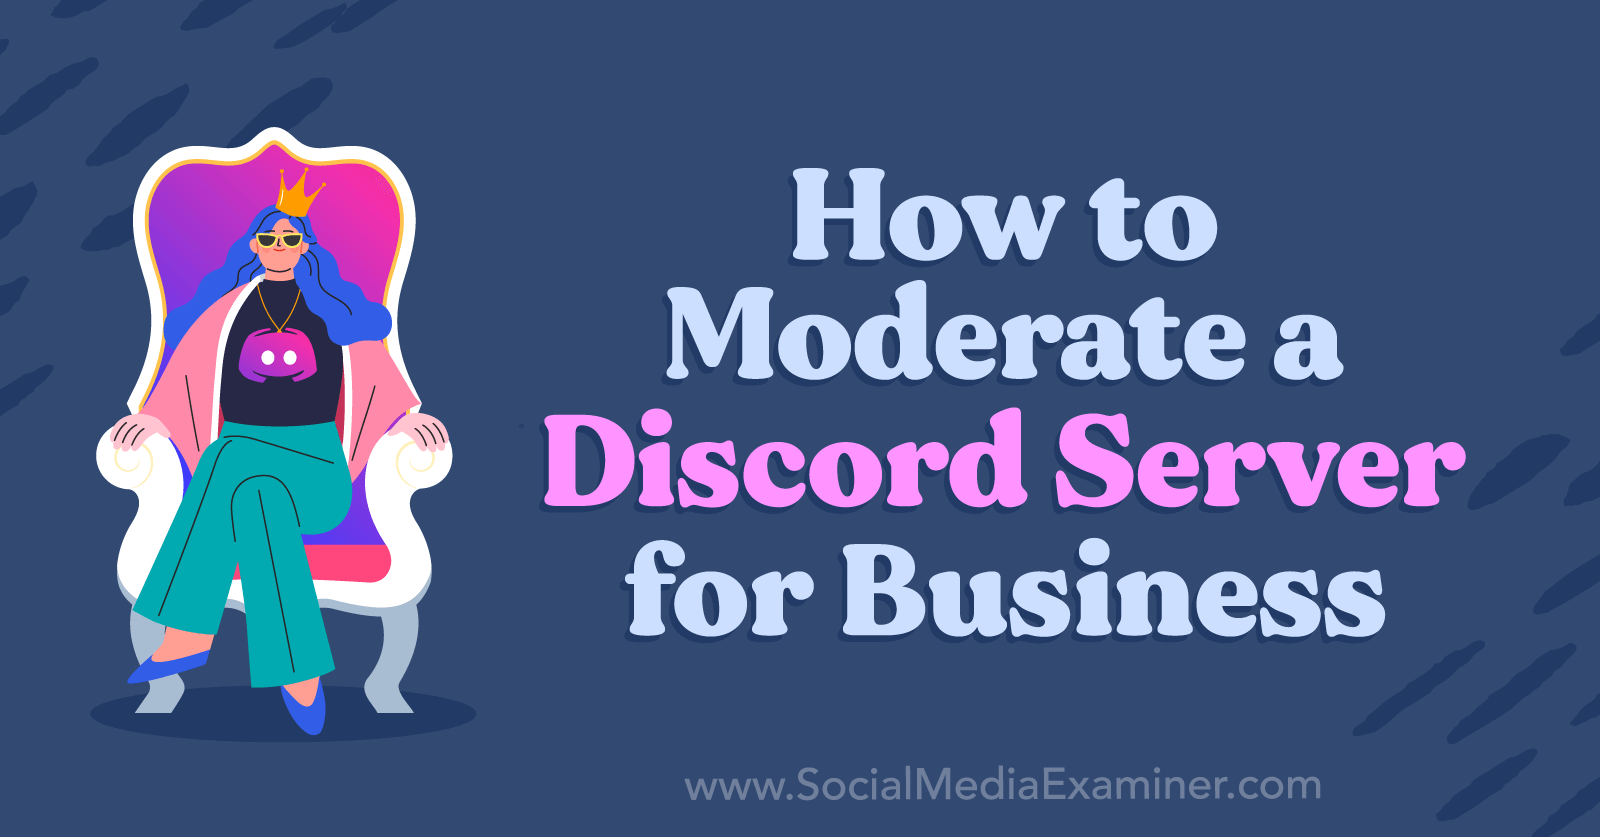 How to Moderate a Discord Server for Business by Corinna Keefe on Social Media Examiner.